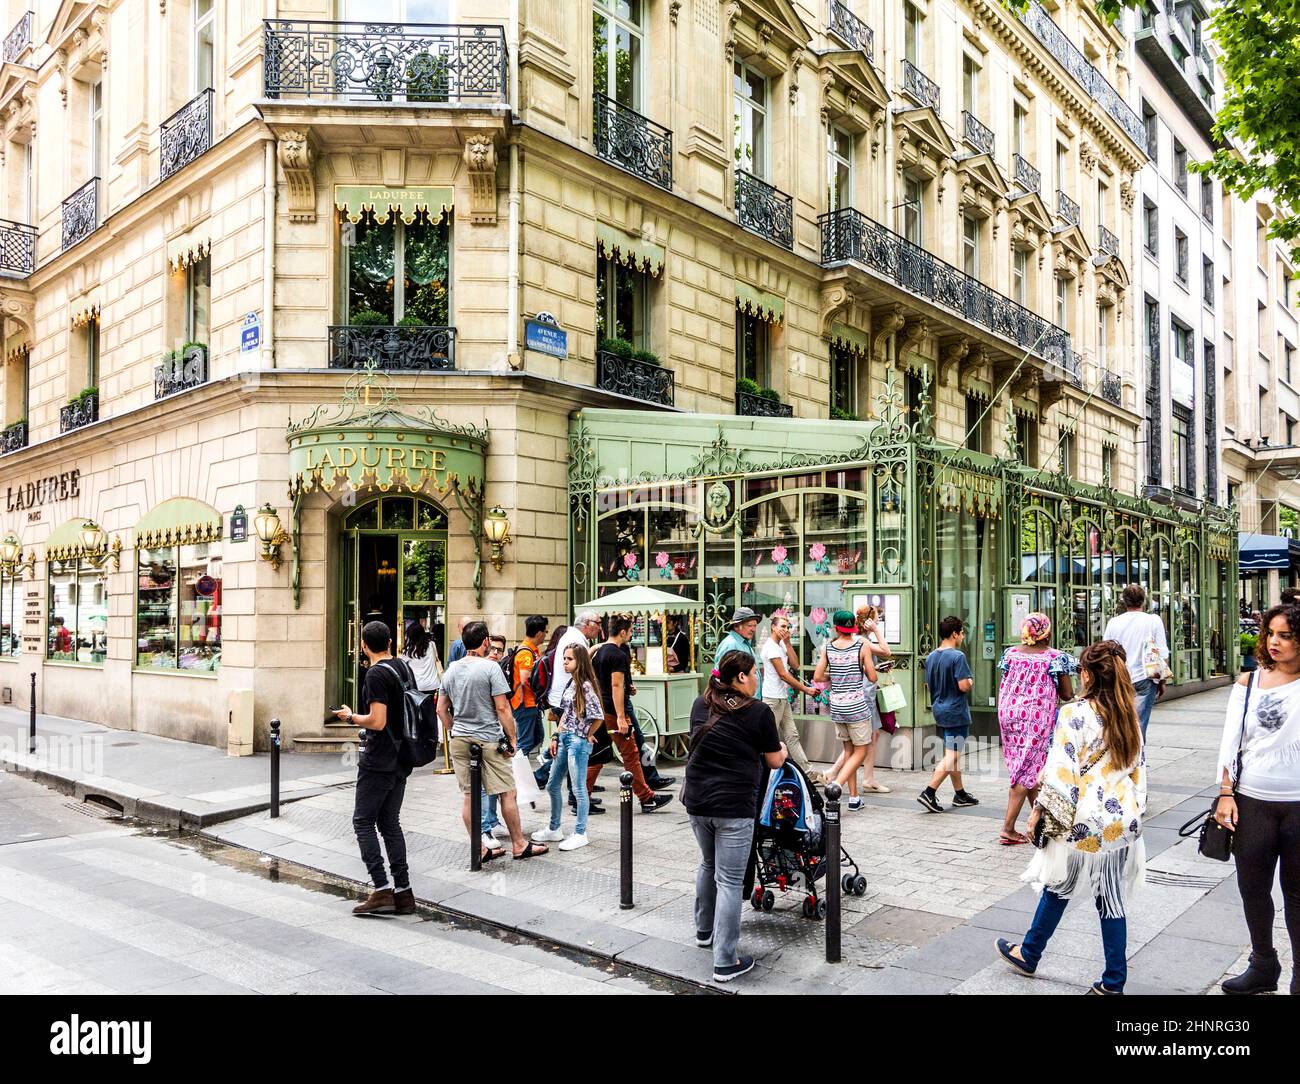 people in front of LADUREE shop at champs elysees Stock Photo